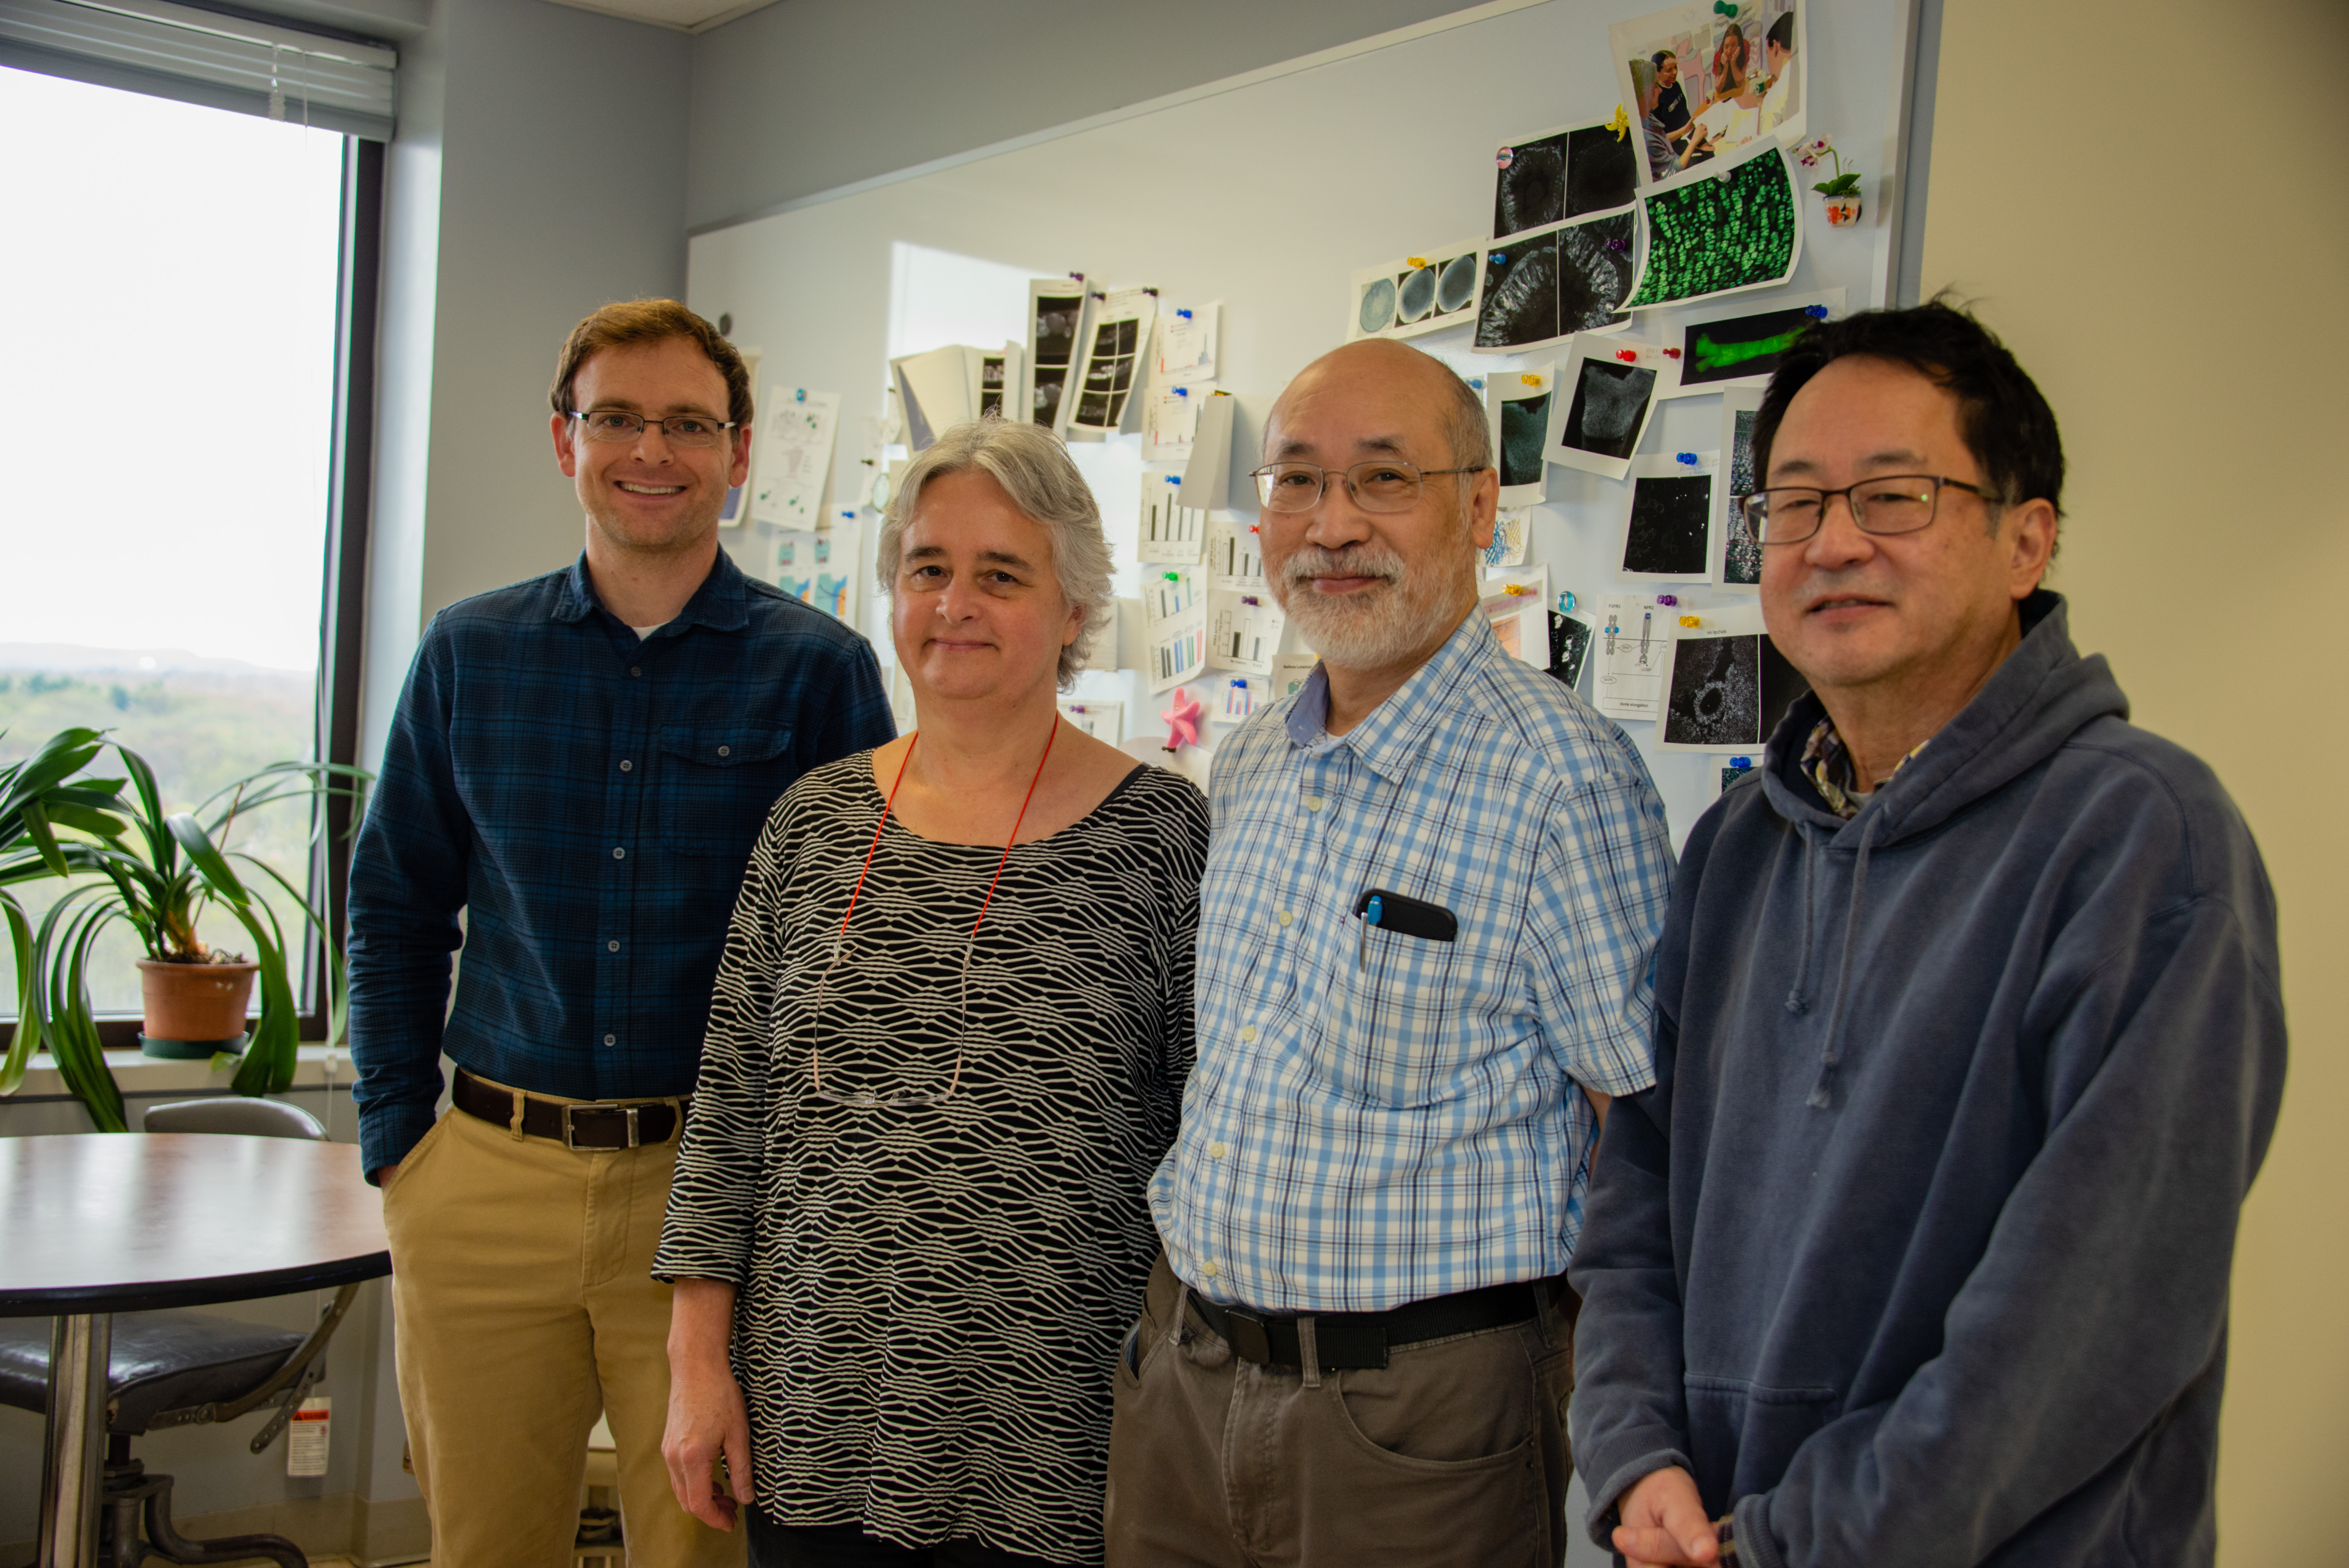 Jeremy Egbert Ph.D., Laurinda Jaffe Ph.D. (Chair), Siu-Pok Yee Ph.D., and Mark Terasaki Ph.D. in the Department of Cell Biology at UConn Health on May 1, 2019. (Tina Encarnacion/UConn Health photo)